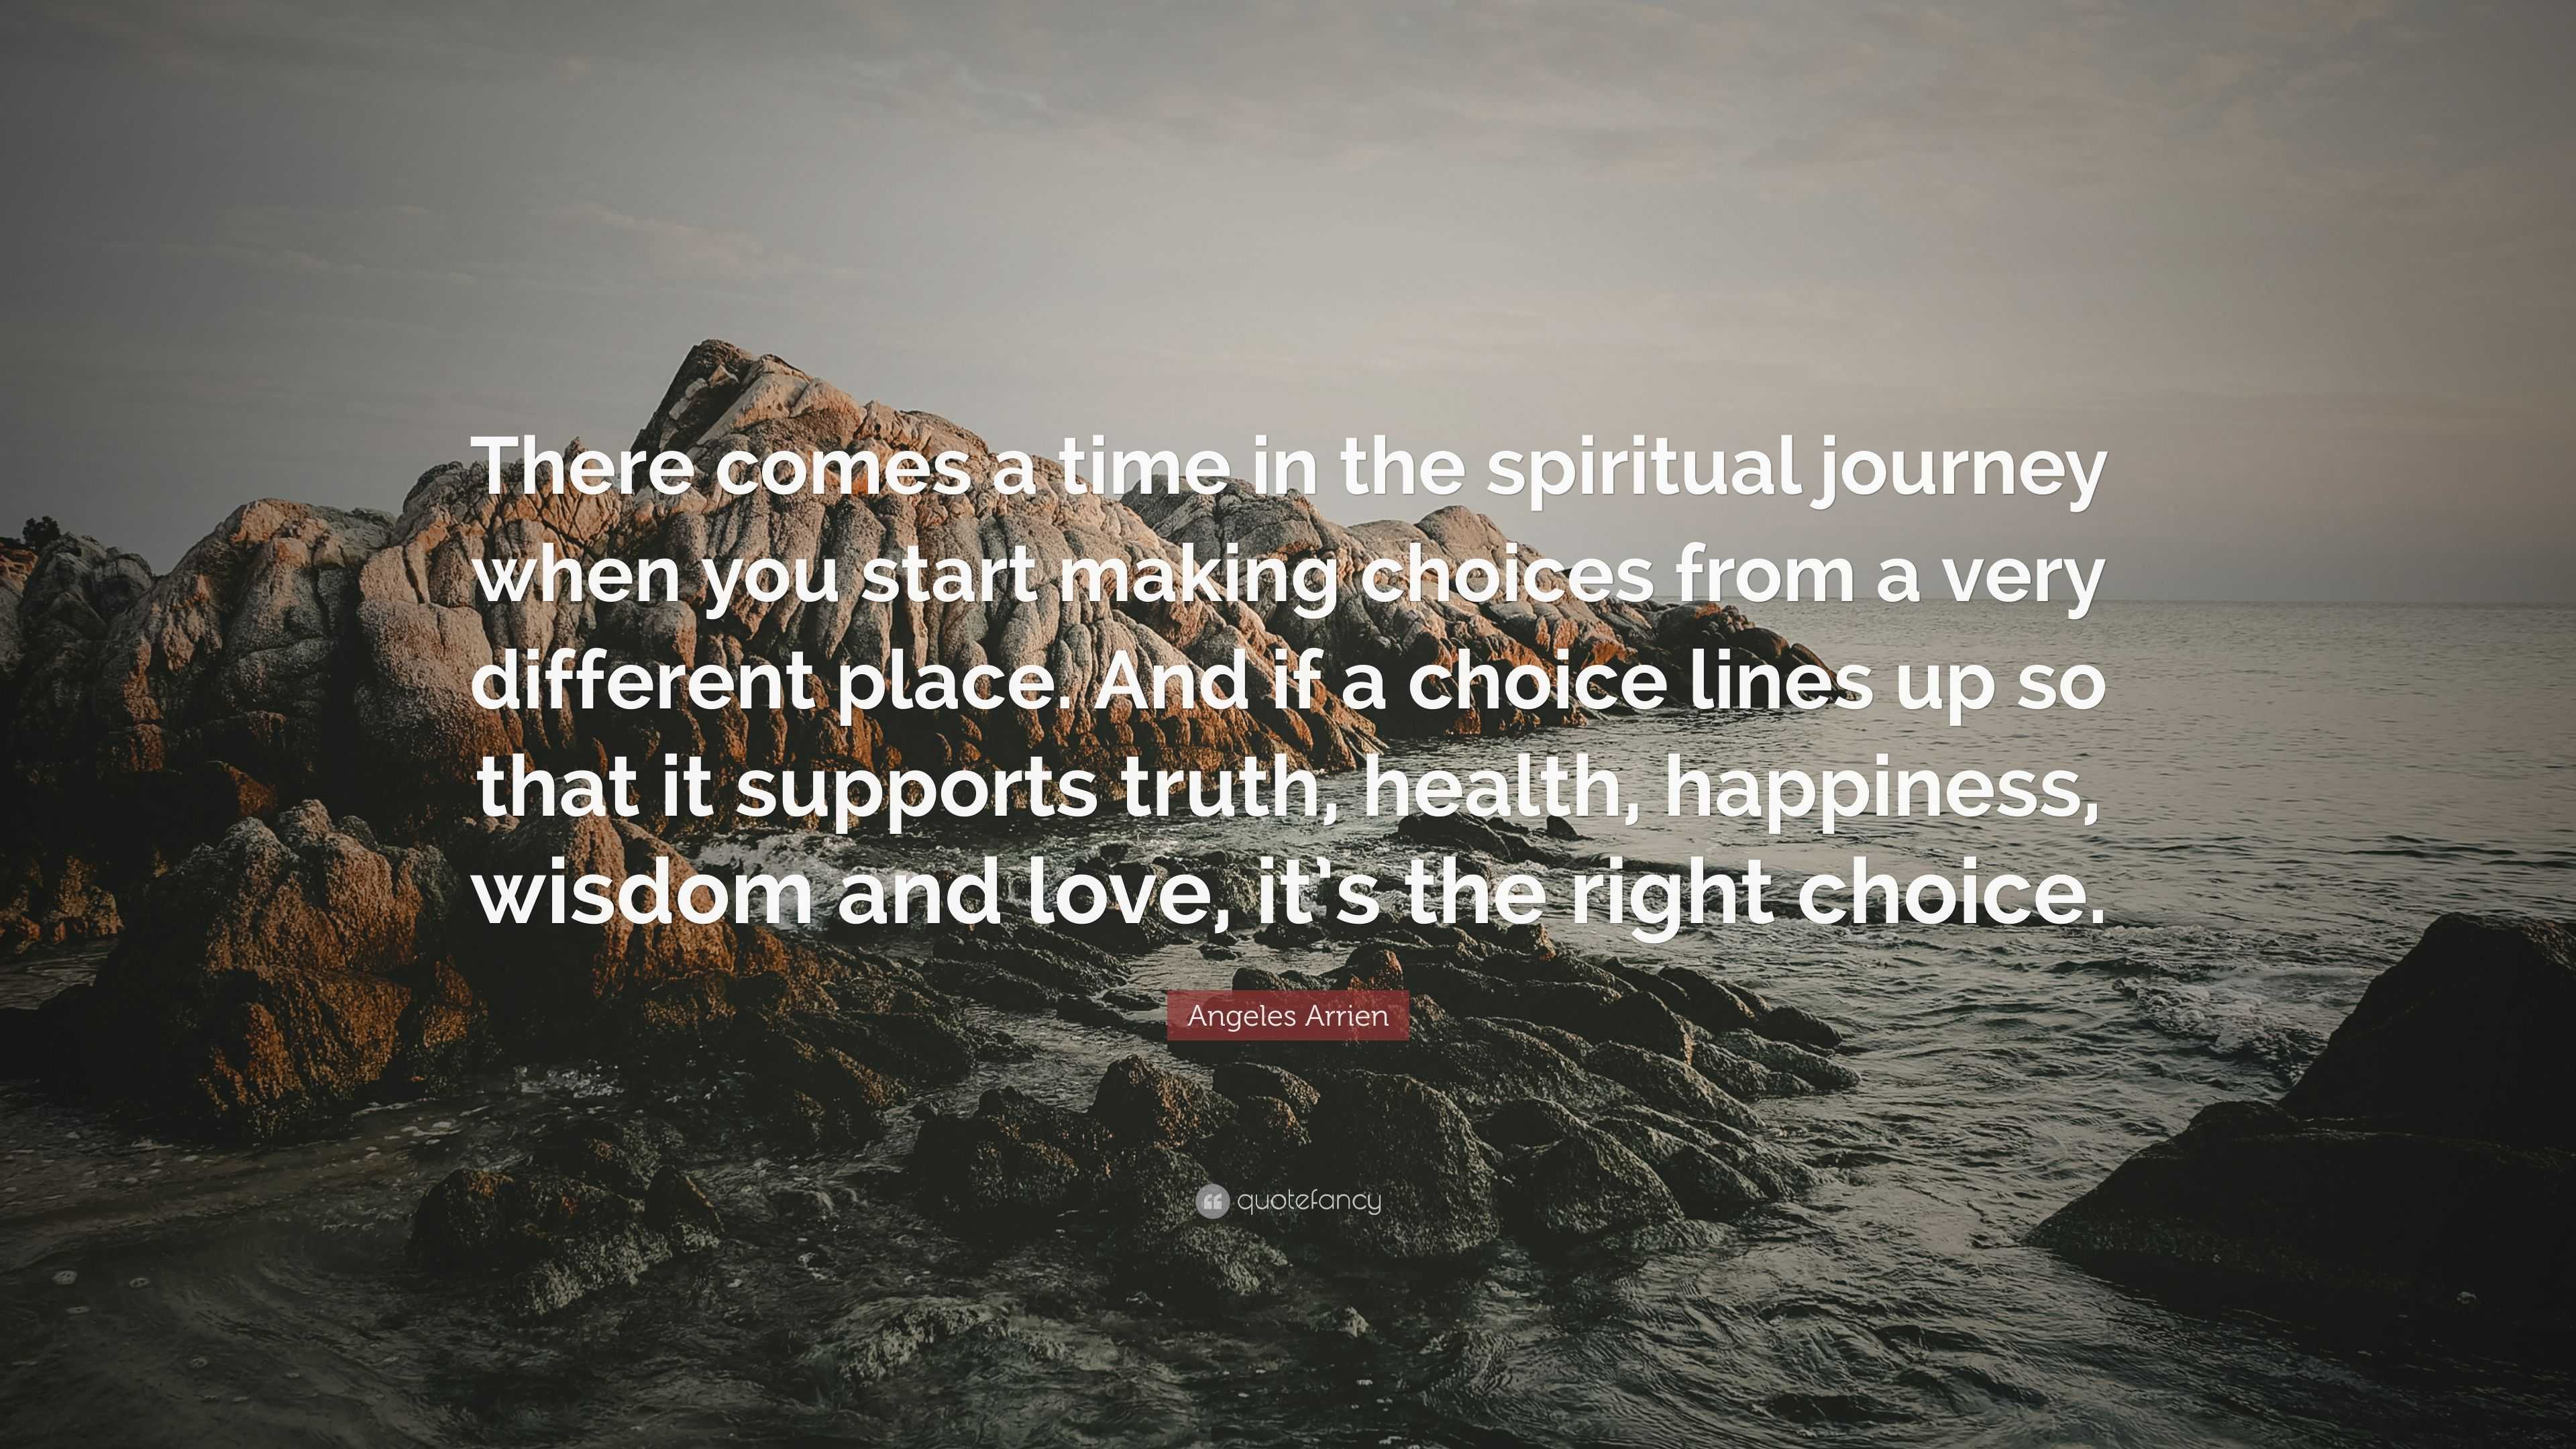 Angeles Arrien Quote: “There comes a time in the spiritual journey when ...